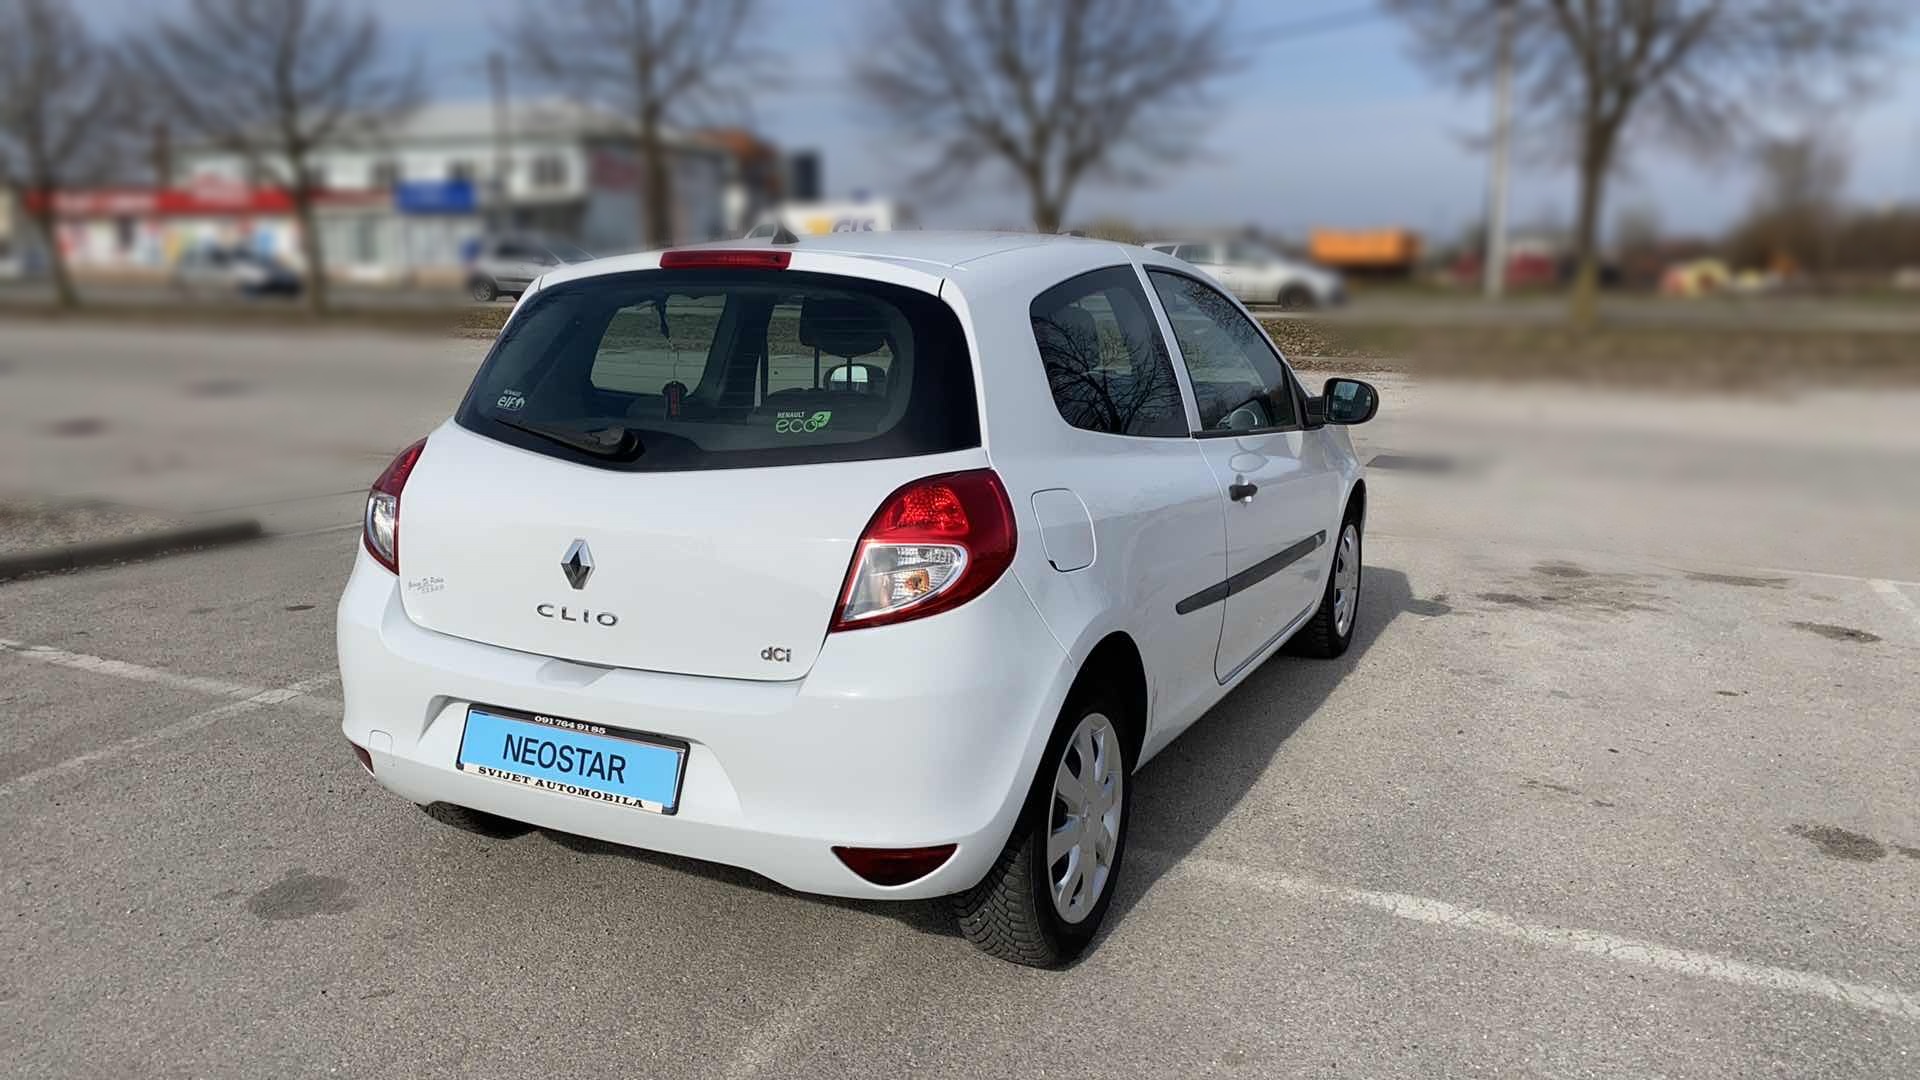 NEOSTAR | Renault Clio 1,5 dCi & Day